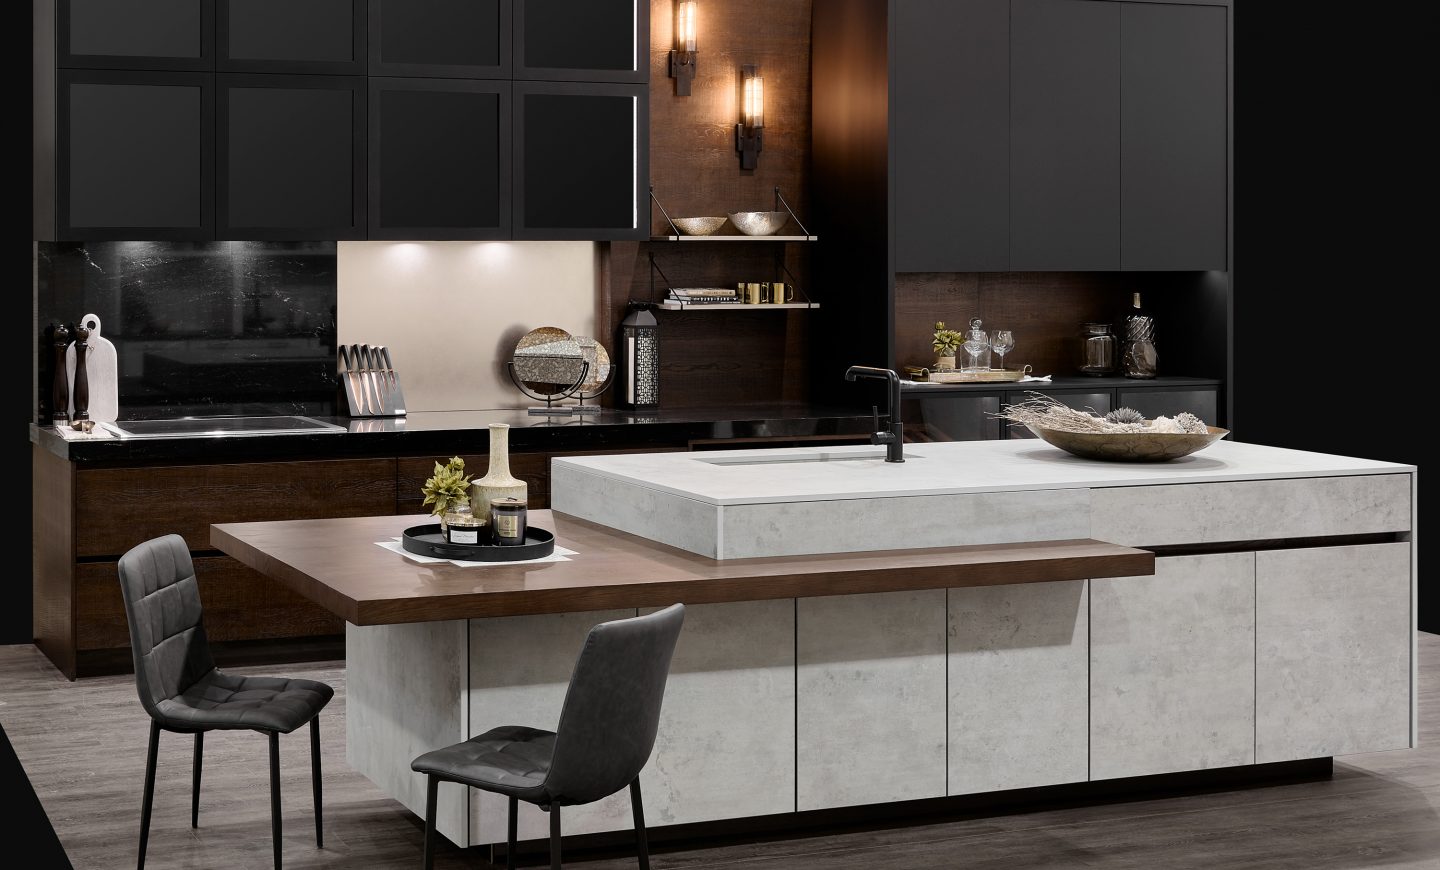 Elmwood Wood Cabinets Kitchen - KBIS 2019 kitchen project - overview